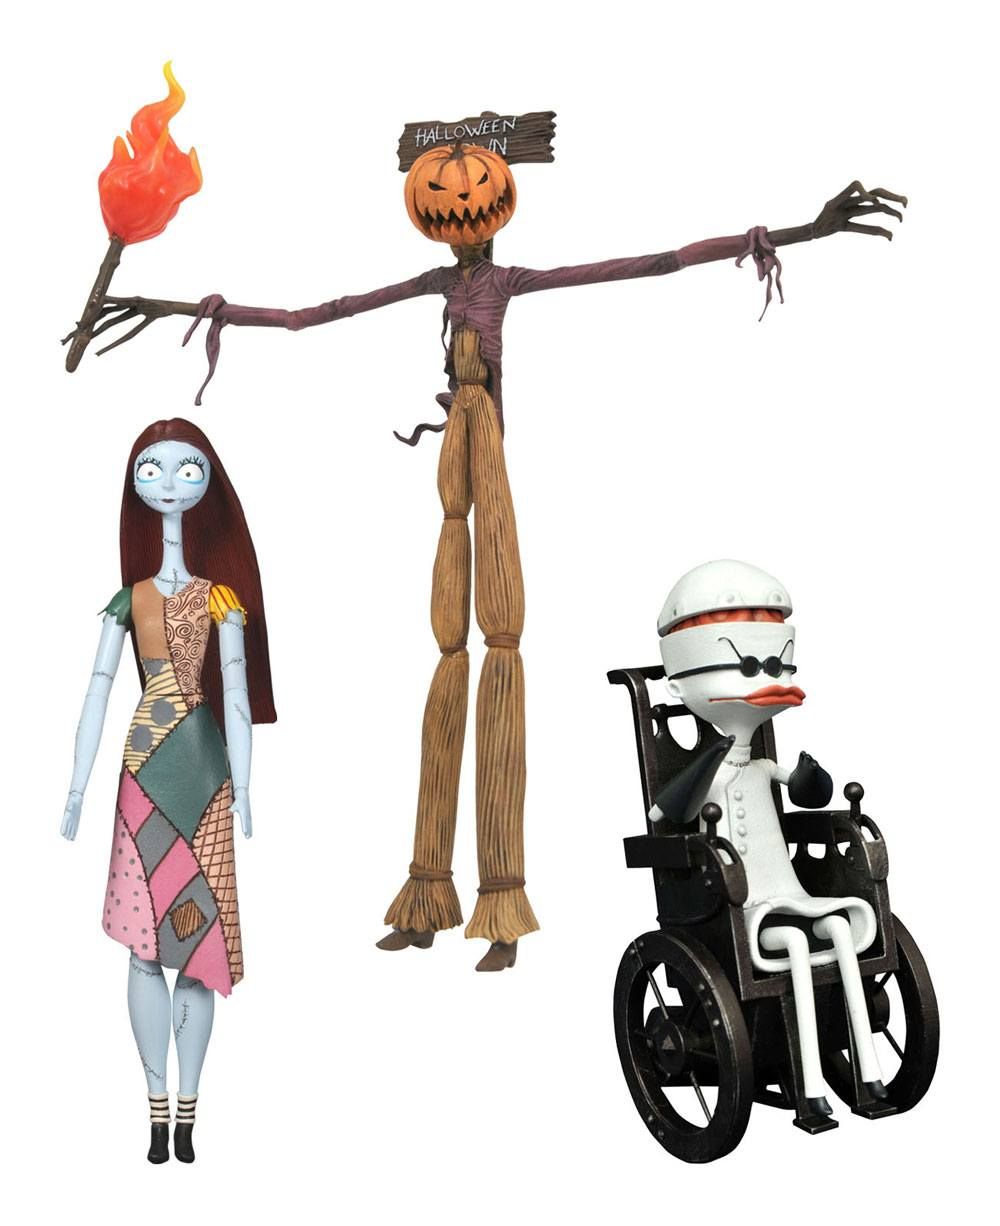 Nightmare before Christmas Select Action Figures 18 cm Best Of Series 2 Assortment (6) Diamond Select